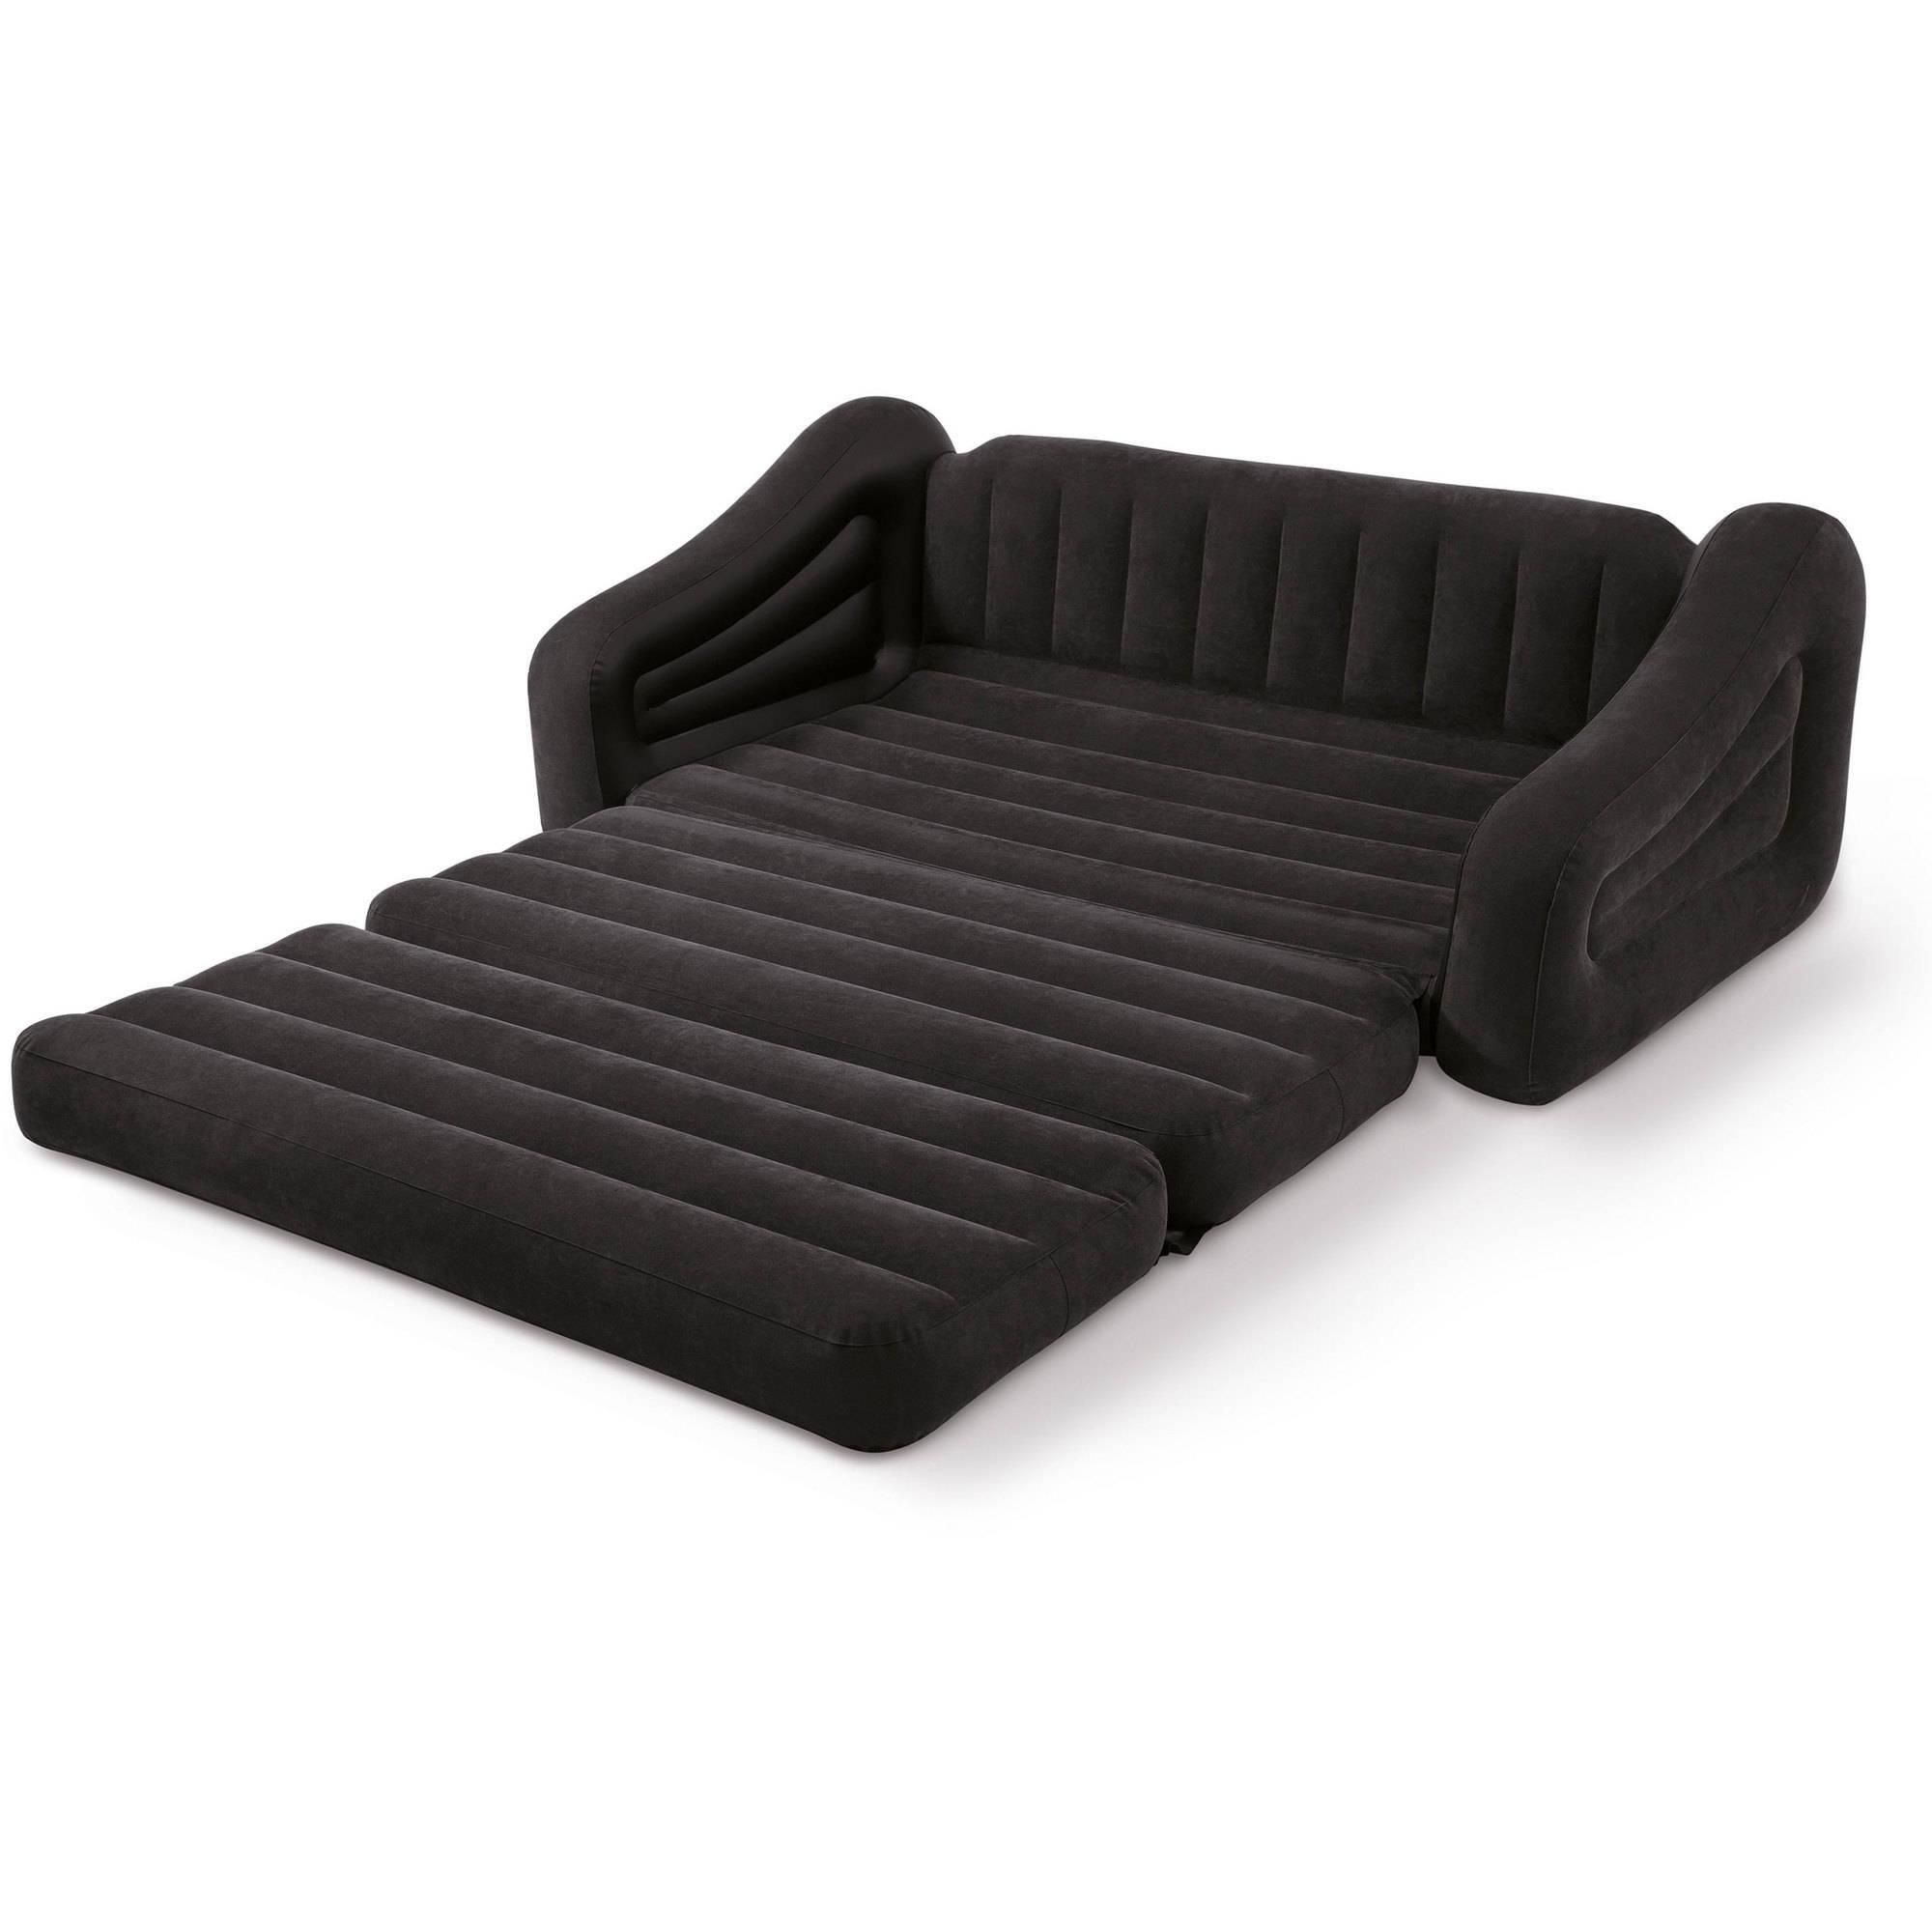 Intex Queen Inflatable Pull Out Sofa Bed – Walmart For Intex Sleep Sofas (View 3 of 20)